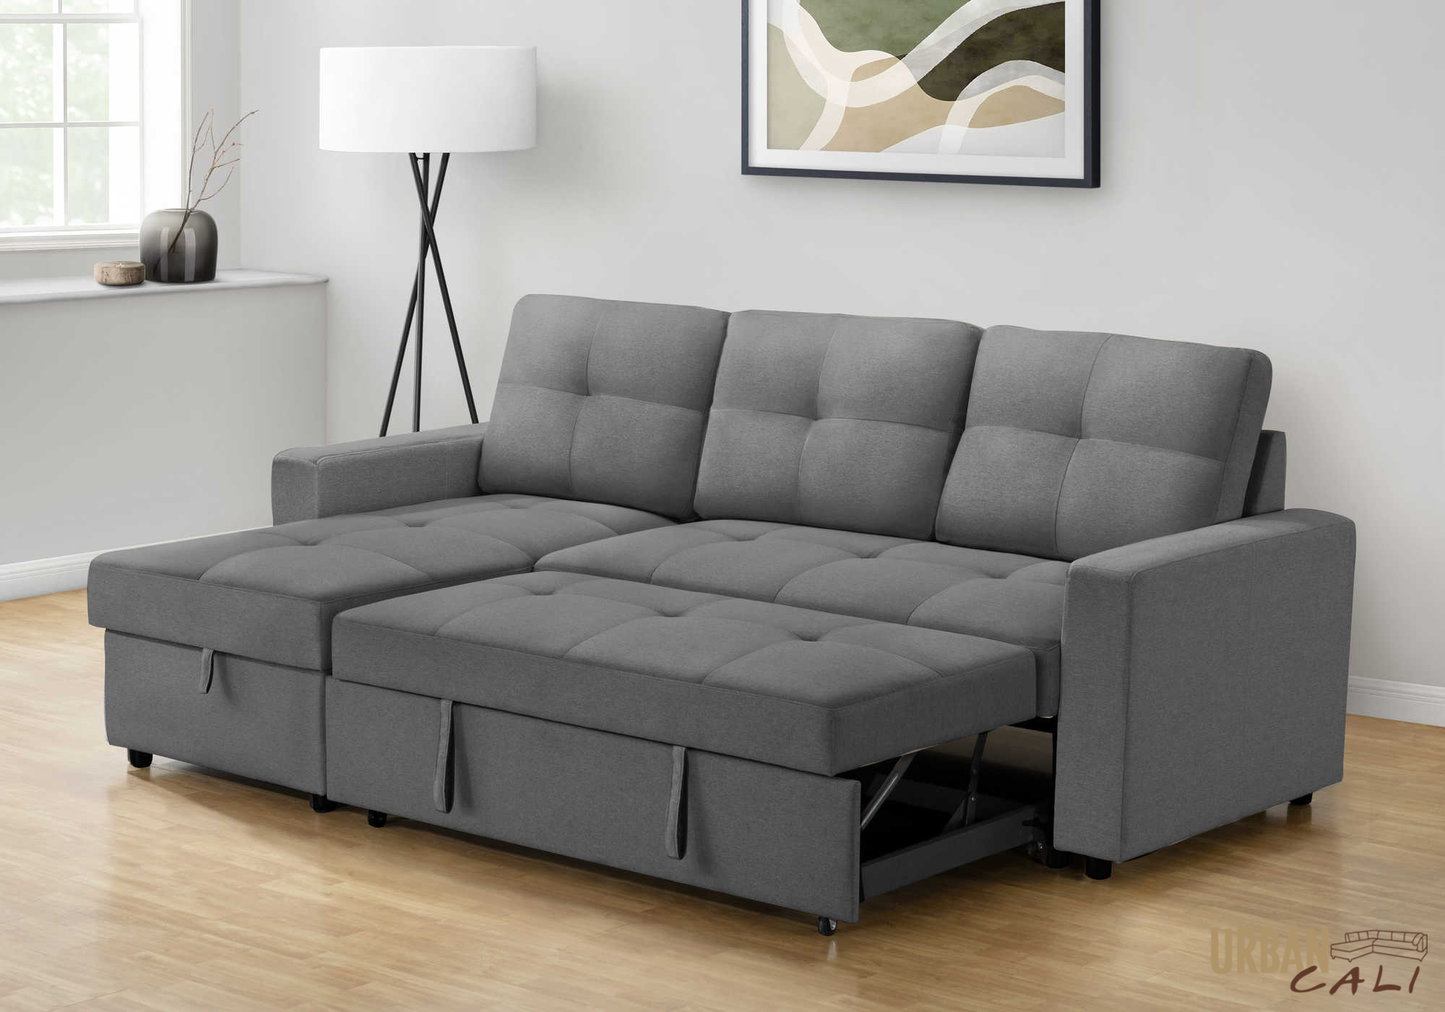 Venice Sleeper Sectional Sofa Bed with Reversible Storage Chaise - Available in 5 Colours